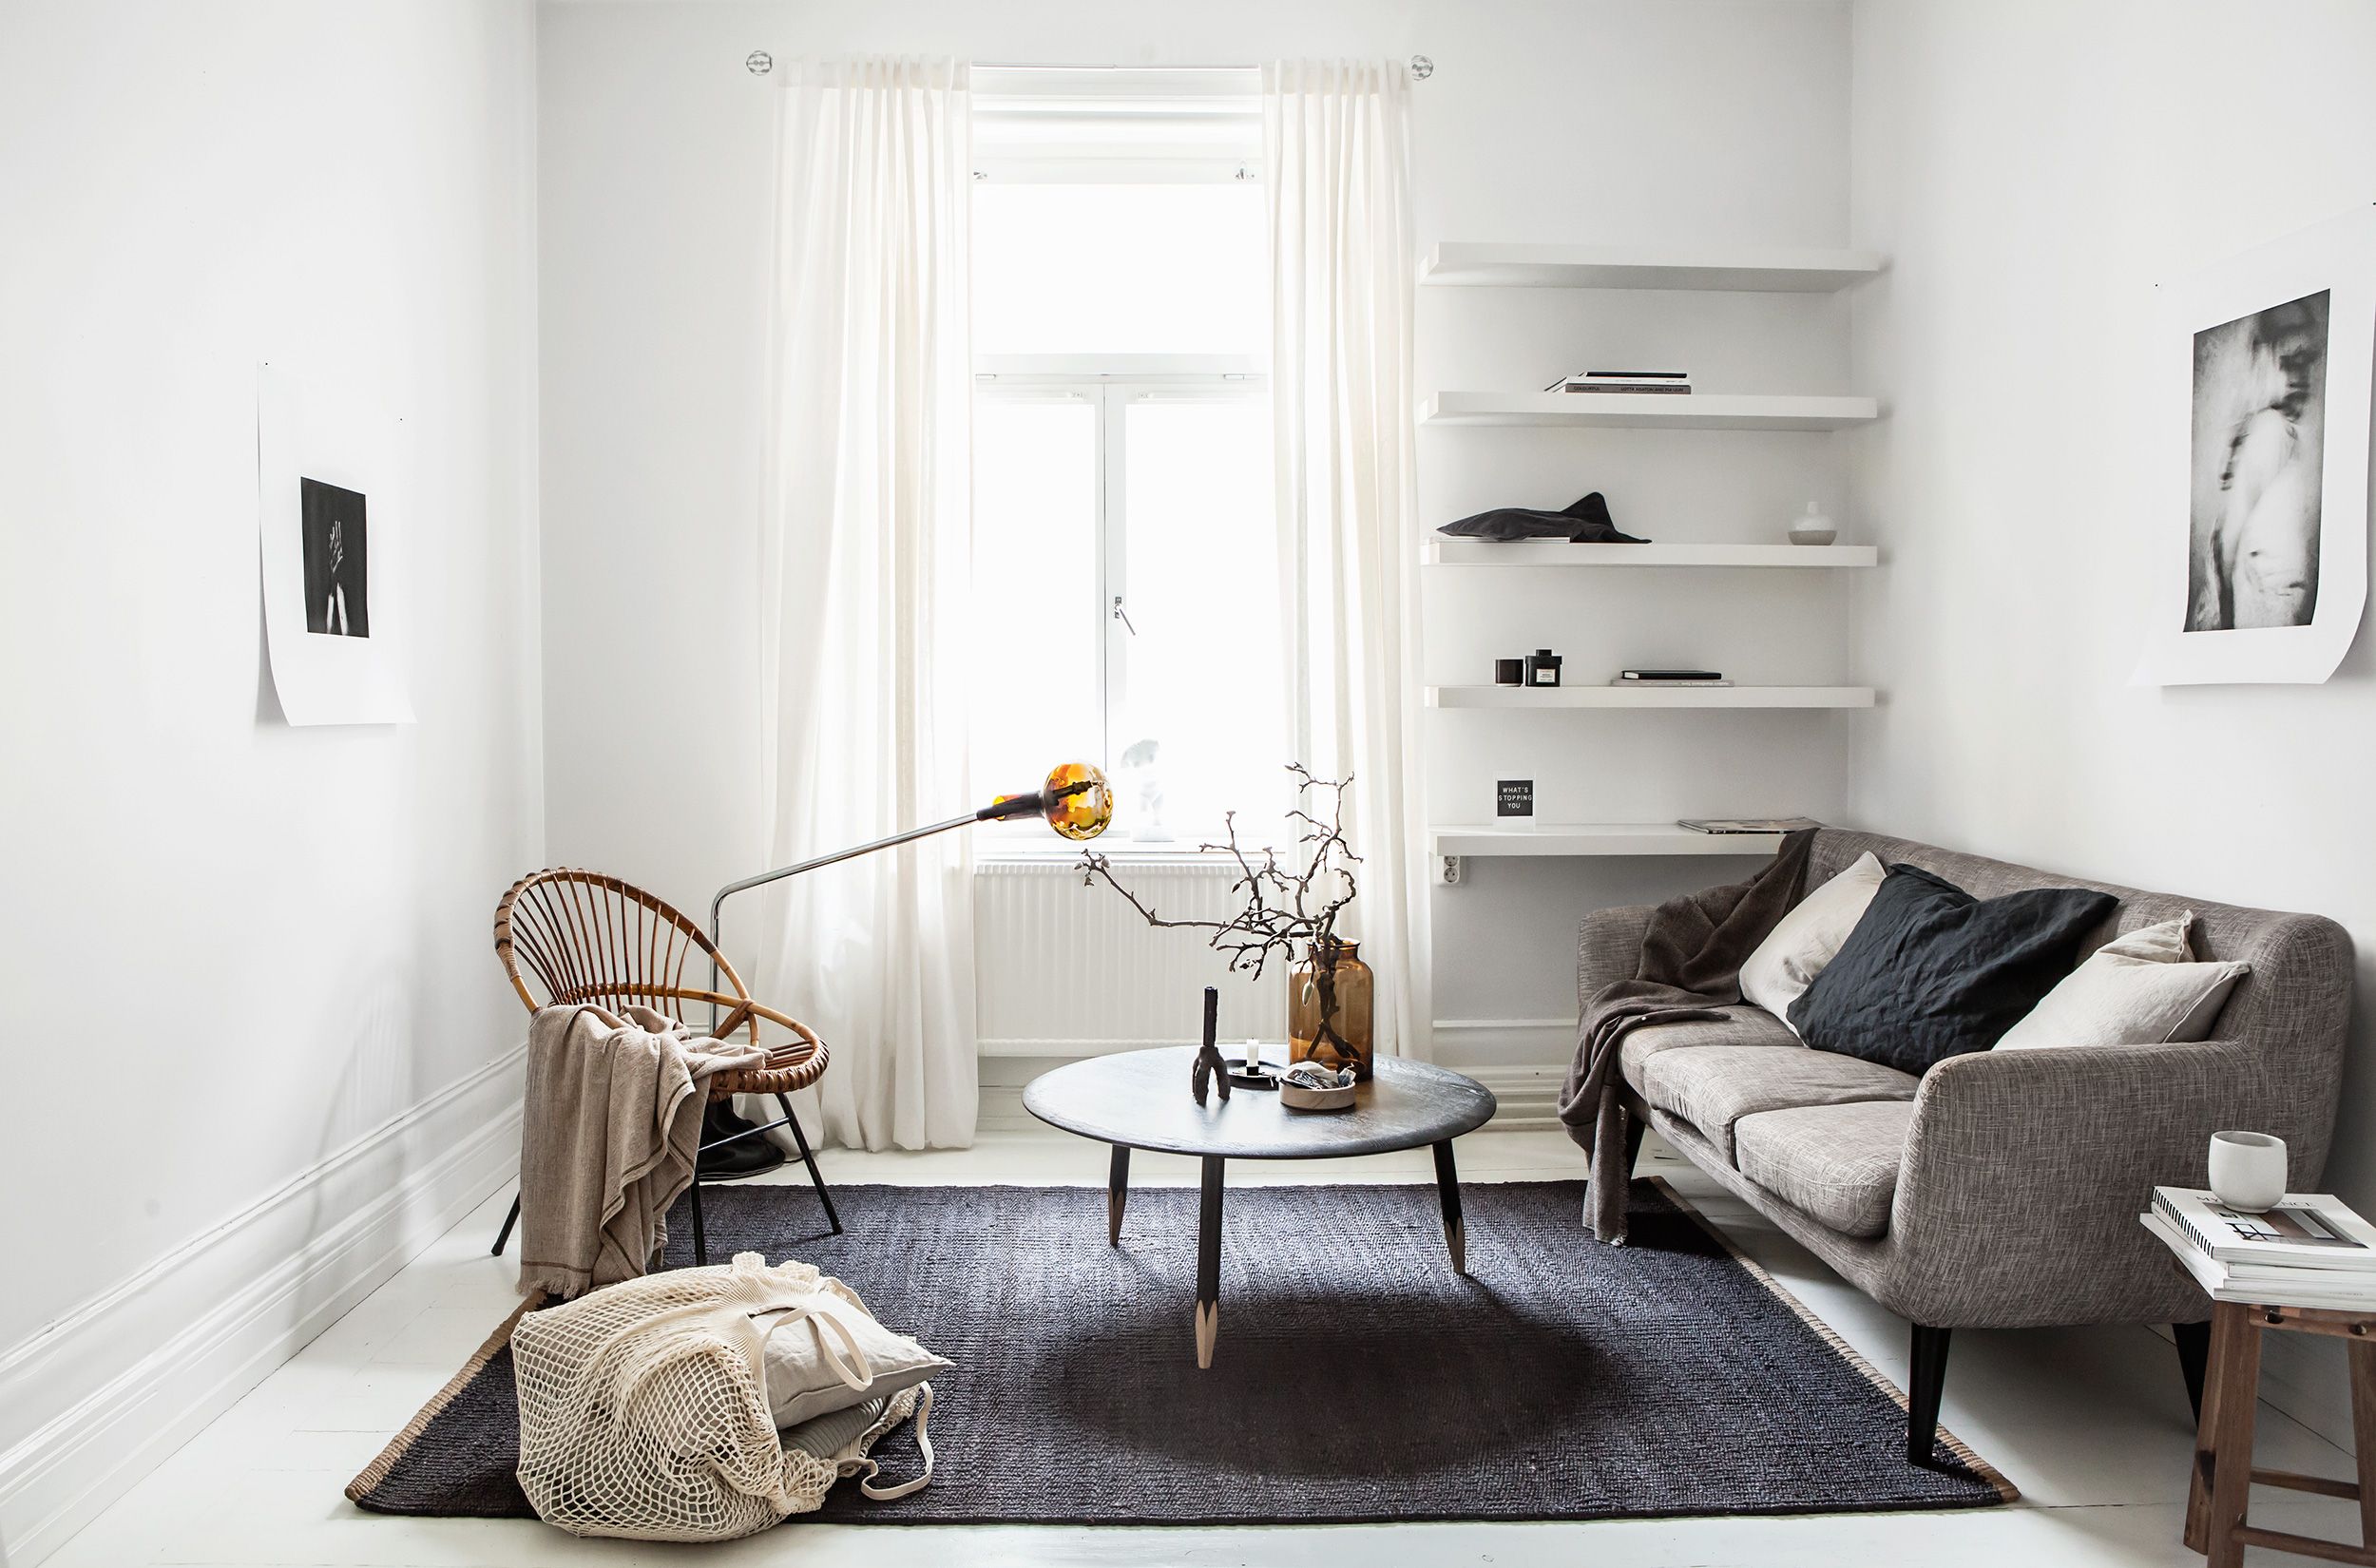 Minimalist Furniture For A Clutter free Home